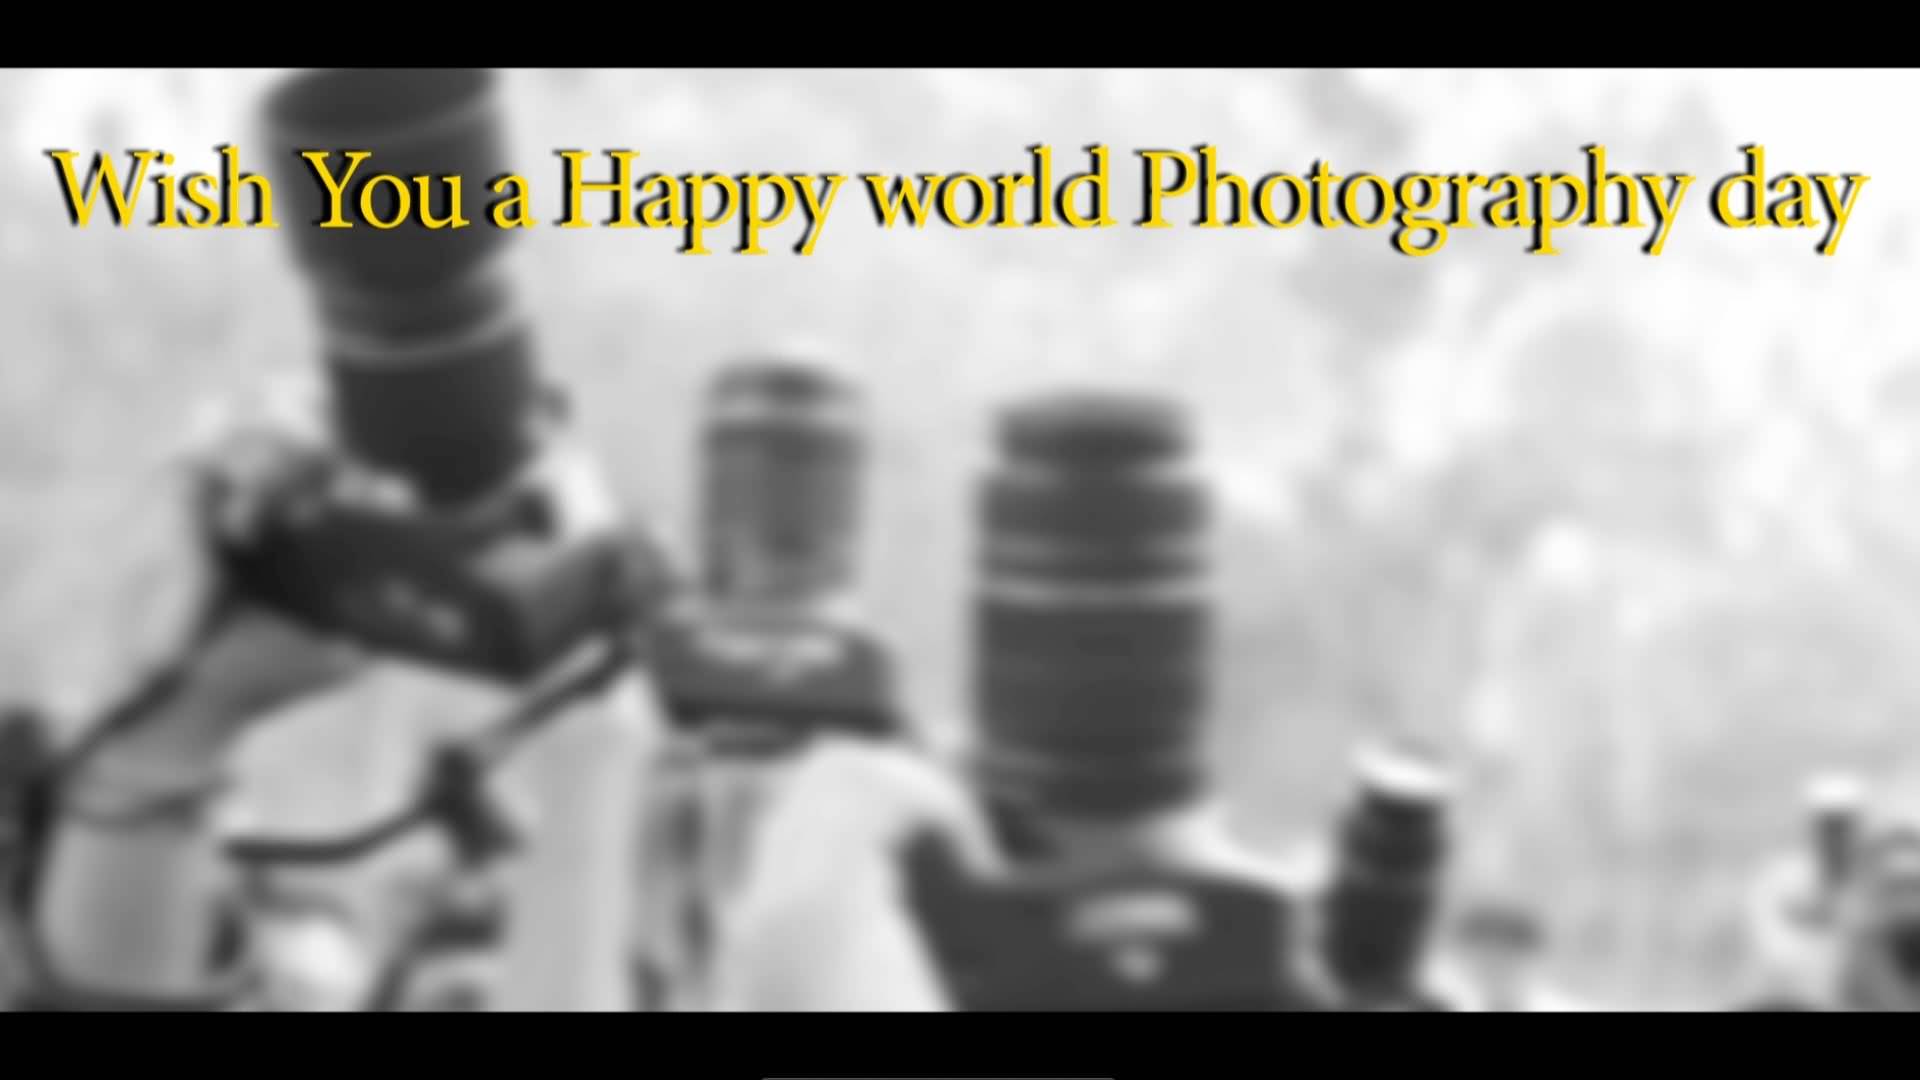 75 Best World Photography Day 18 Wish Pictures And Images